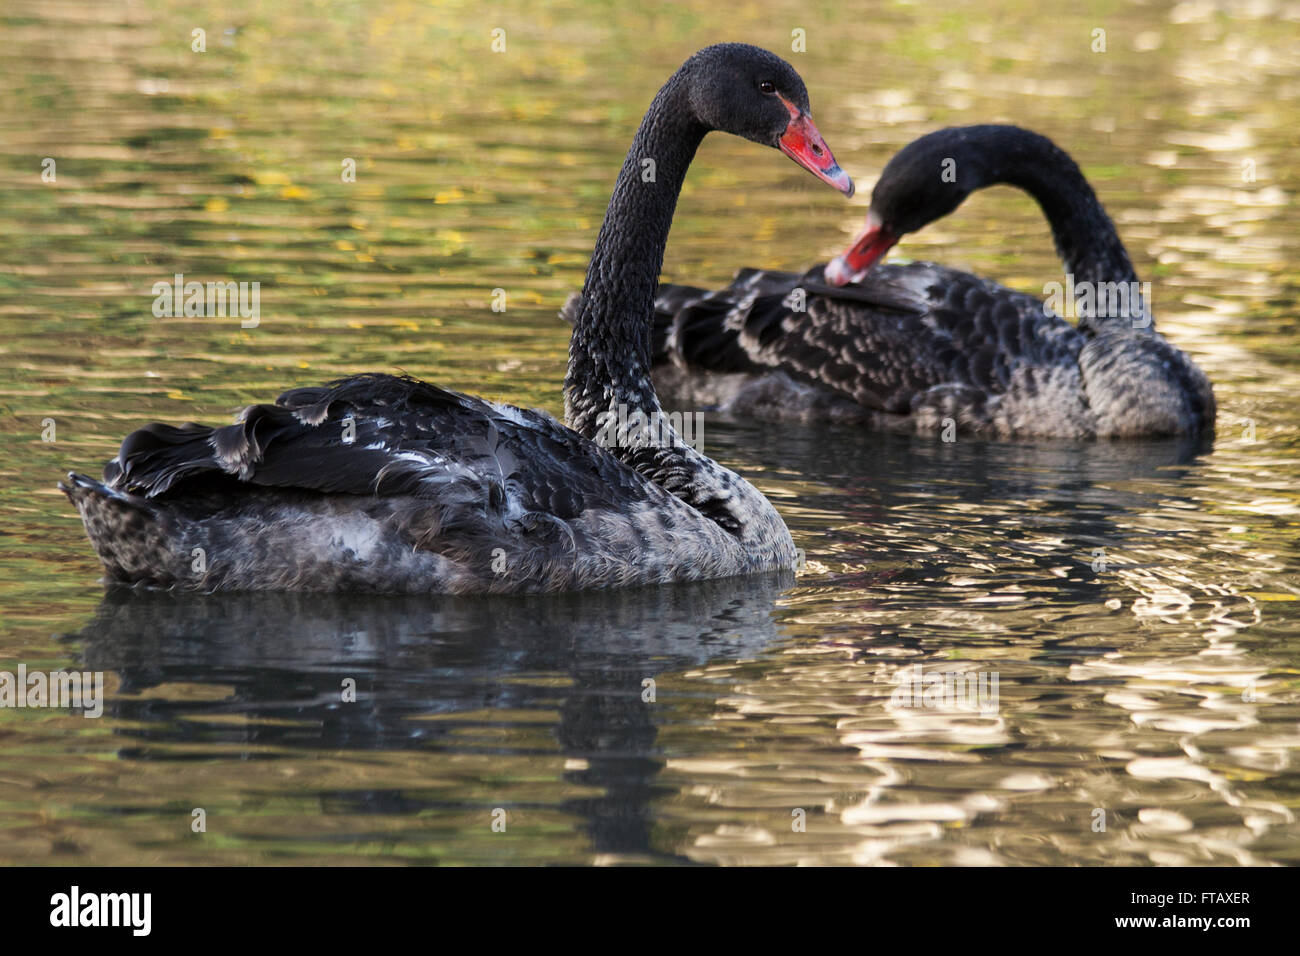 Black swans signets on glistening golden green water with  dappled black and grey plumage. Long black neck and head a red bill with base to eye line. Stock Photo